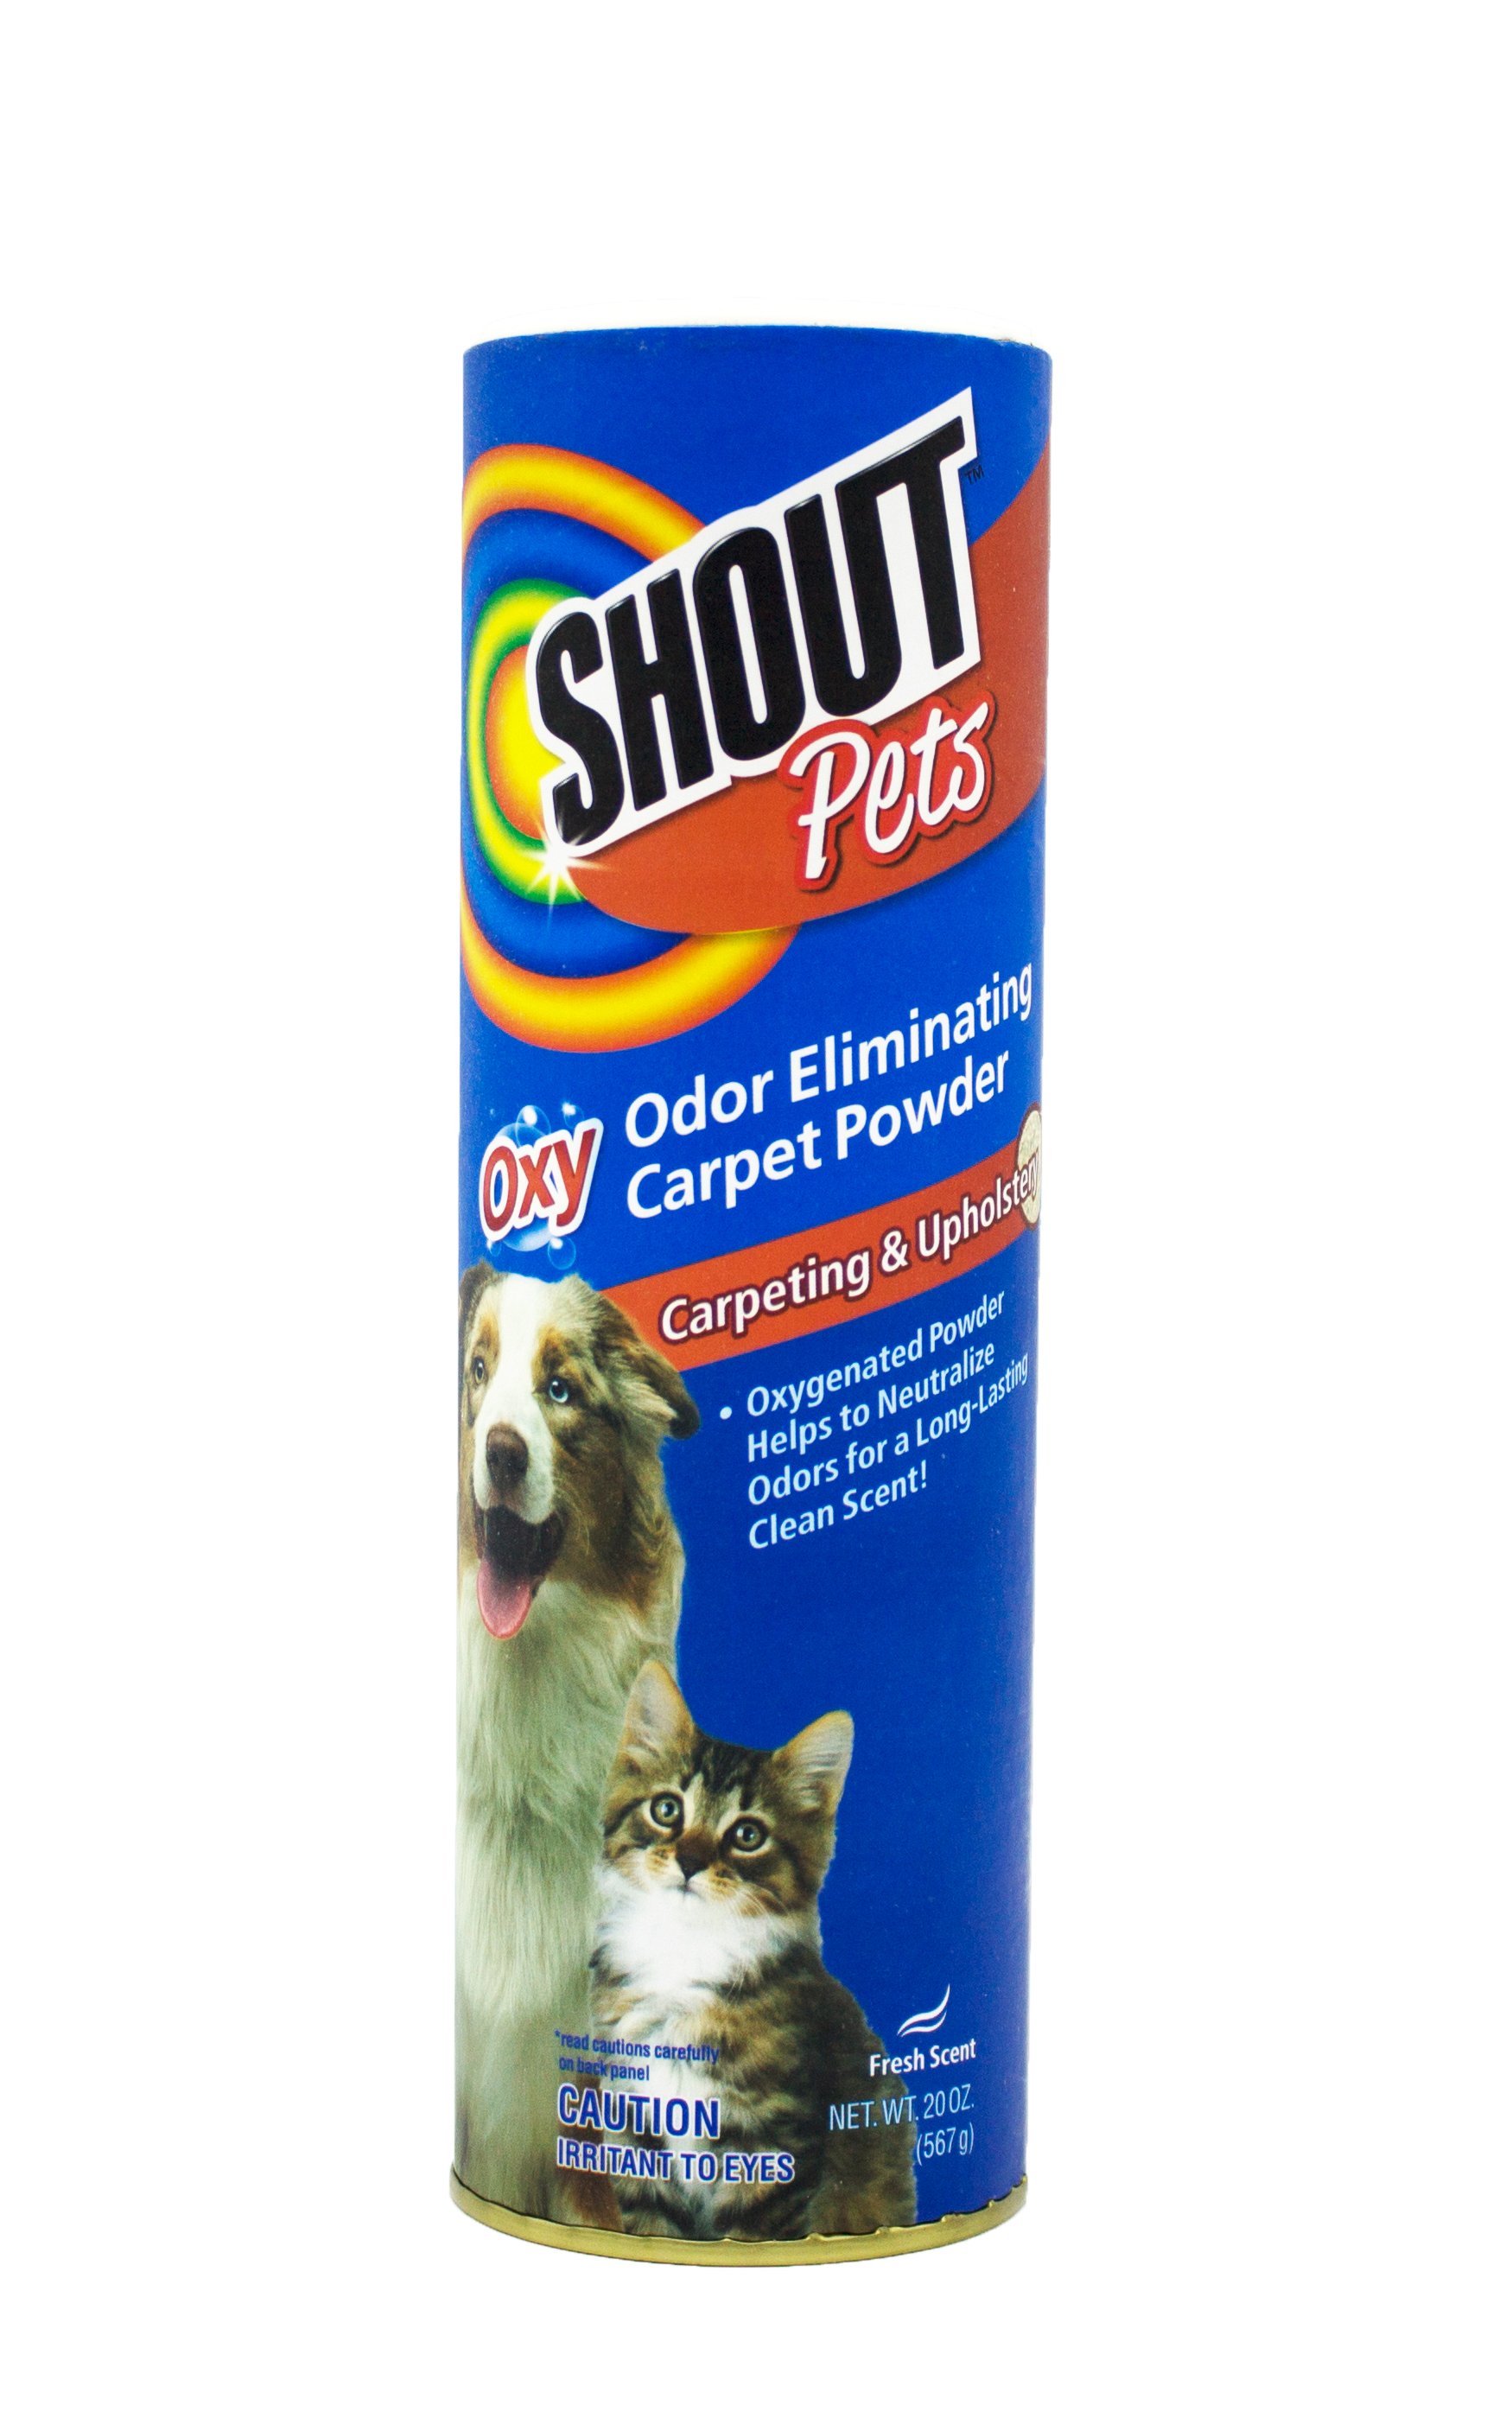 Shout For Pets Stains Turbo Oxy Carpet Odor Eliminator Powder 20 Ounces